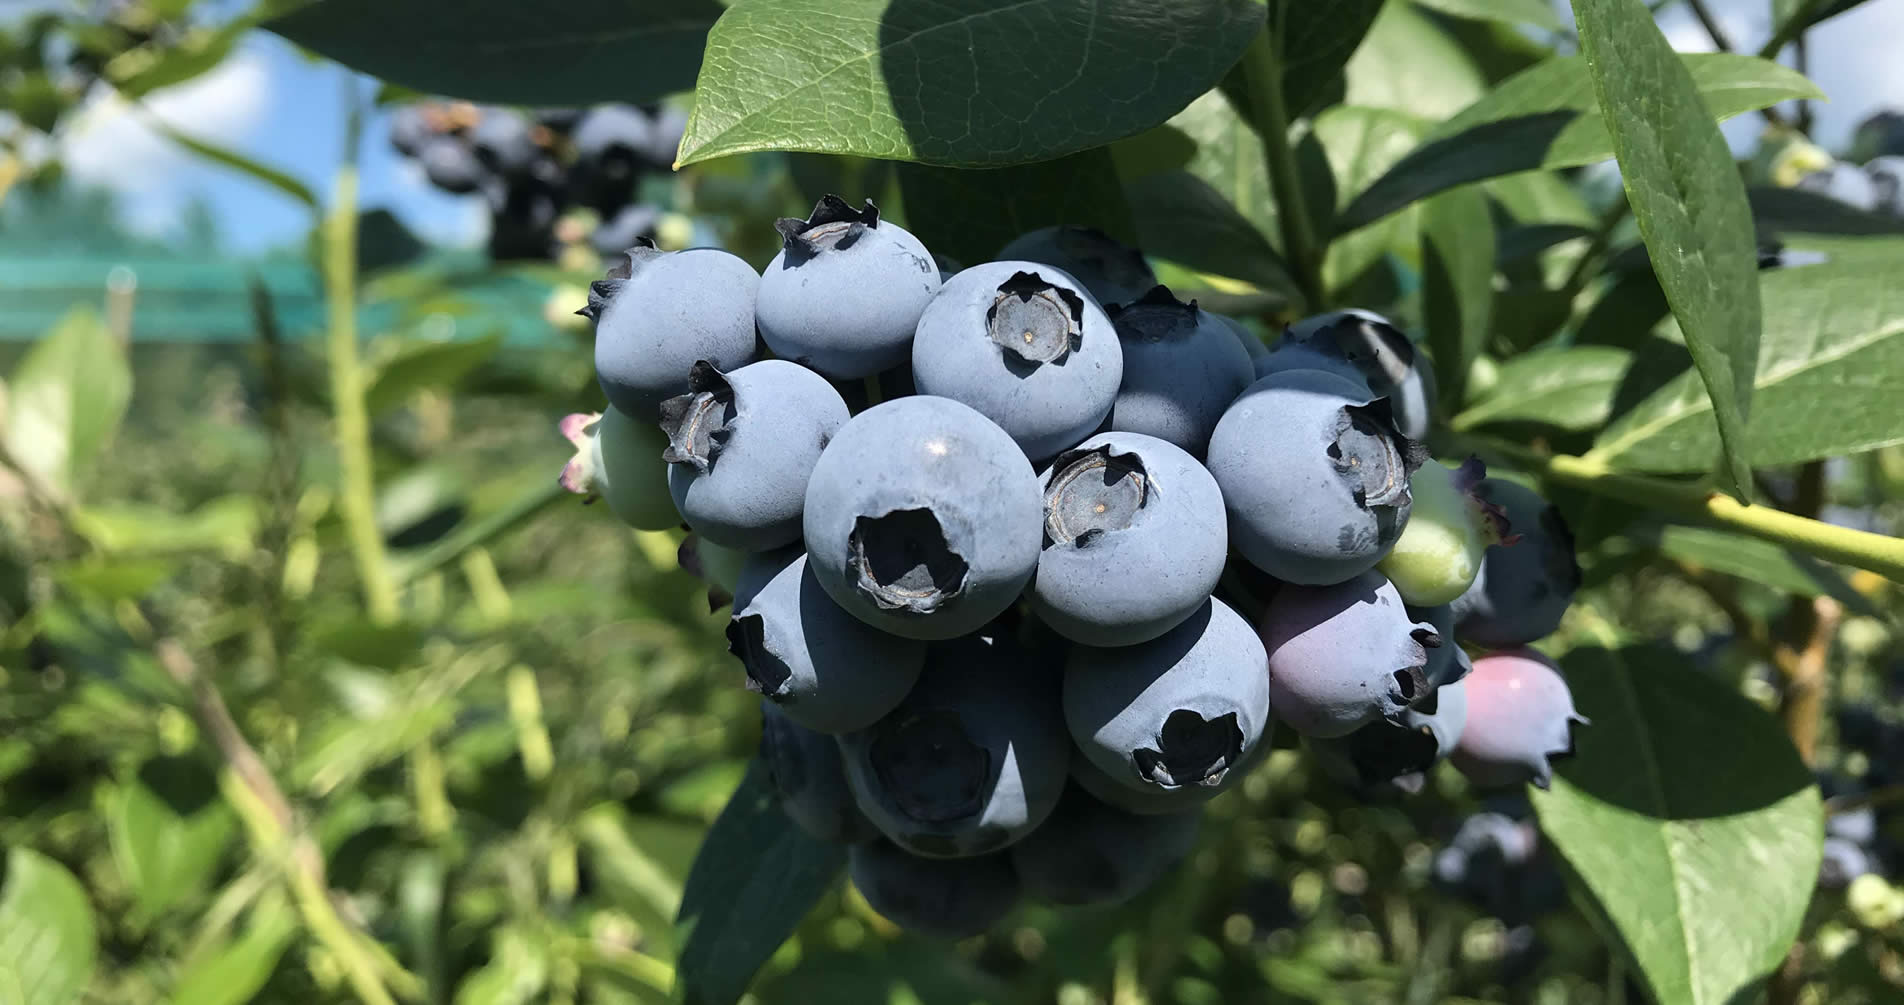 Pick Your
Own
Blueberries